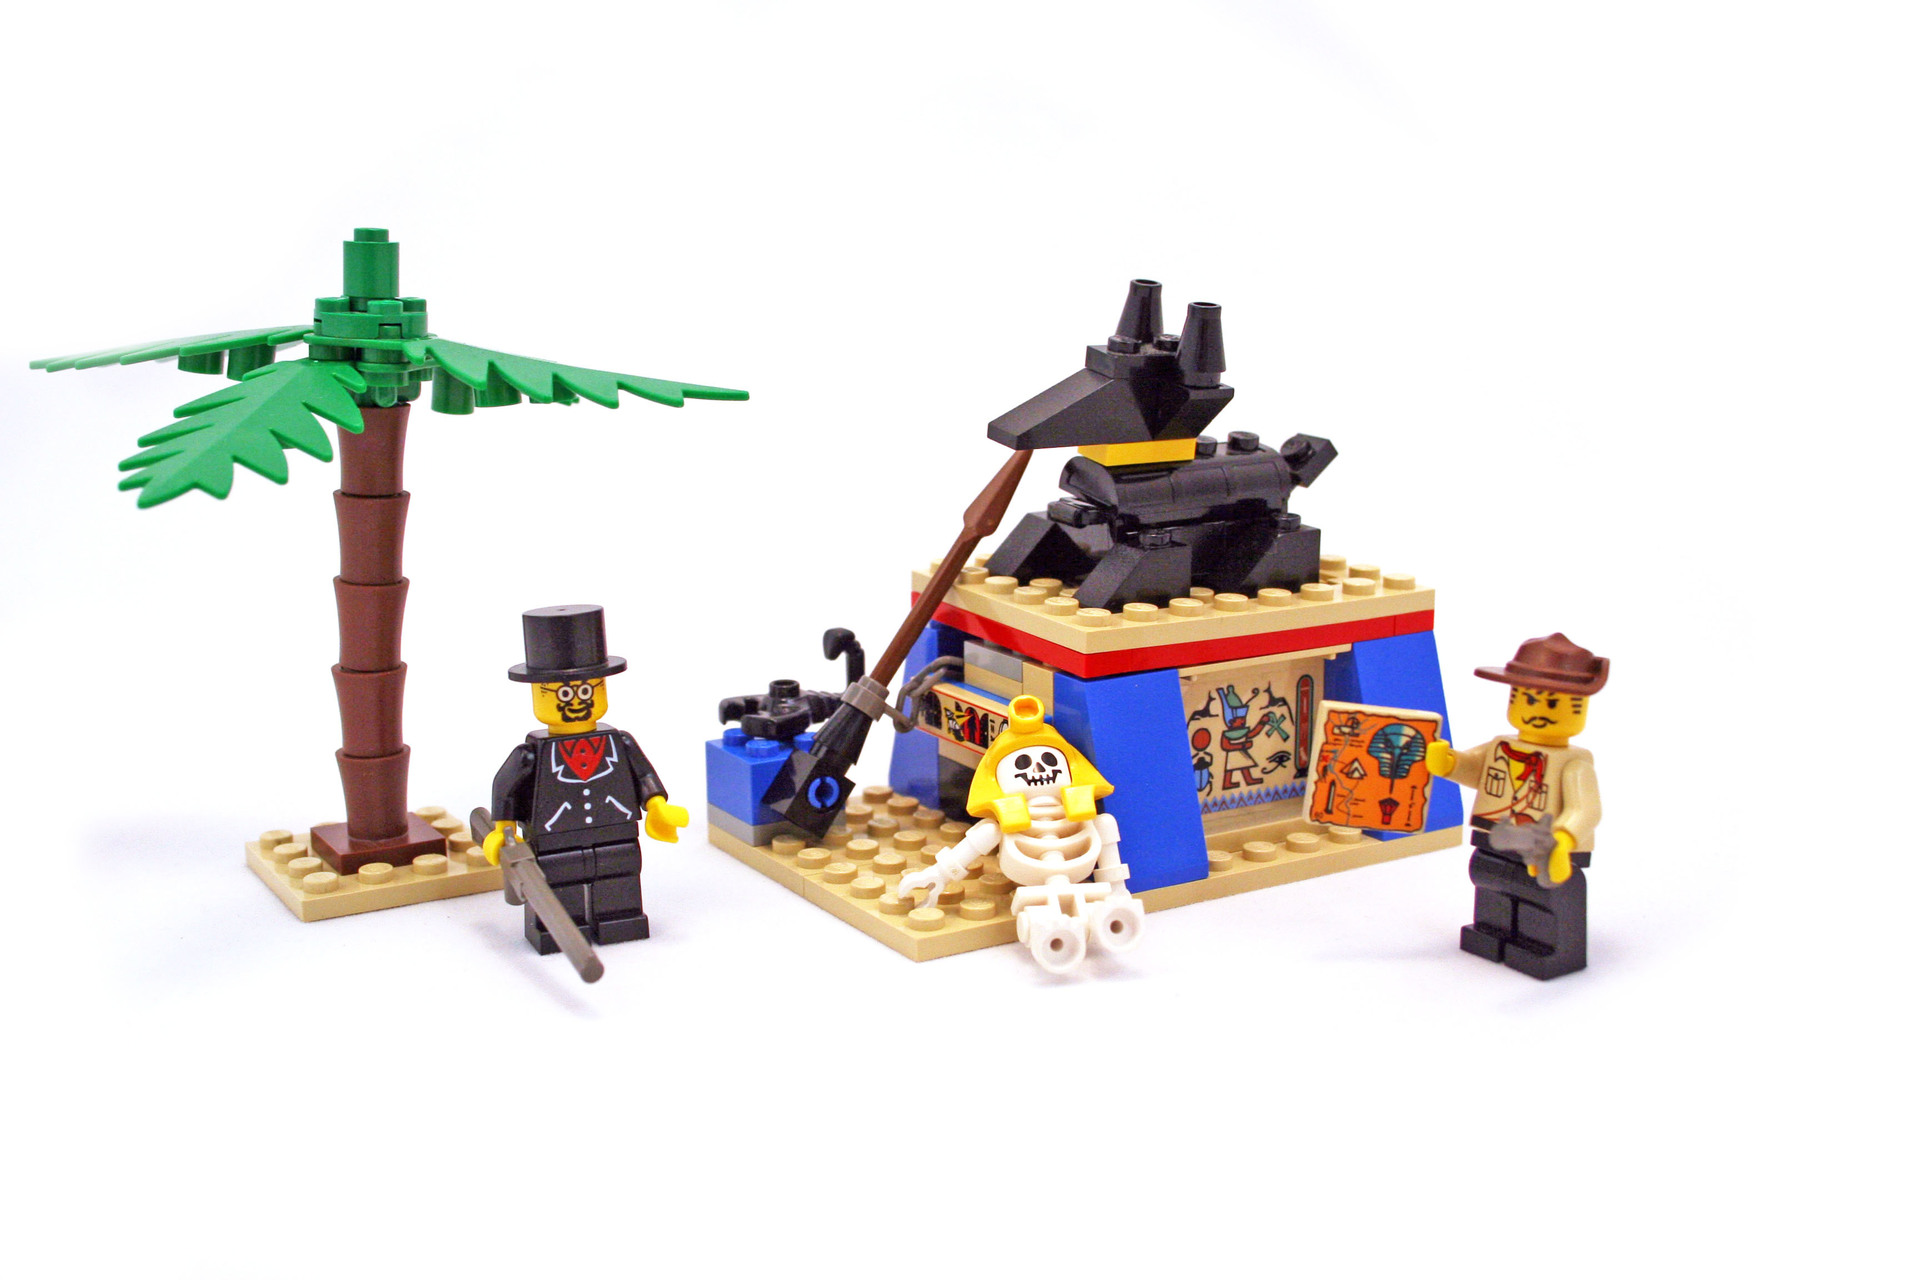 LEGO 10273 Haunted House      - All the historic LEGO references from LEGO Adventurers and beyond.